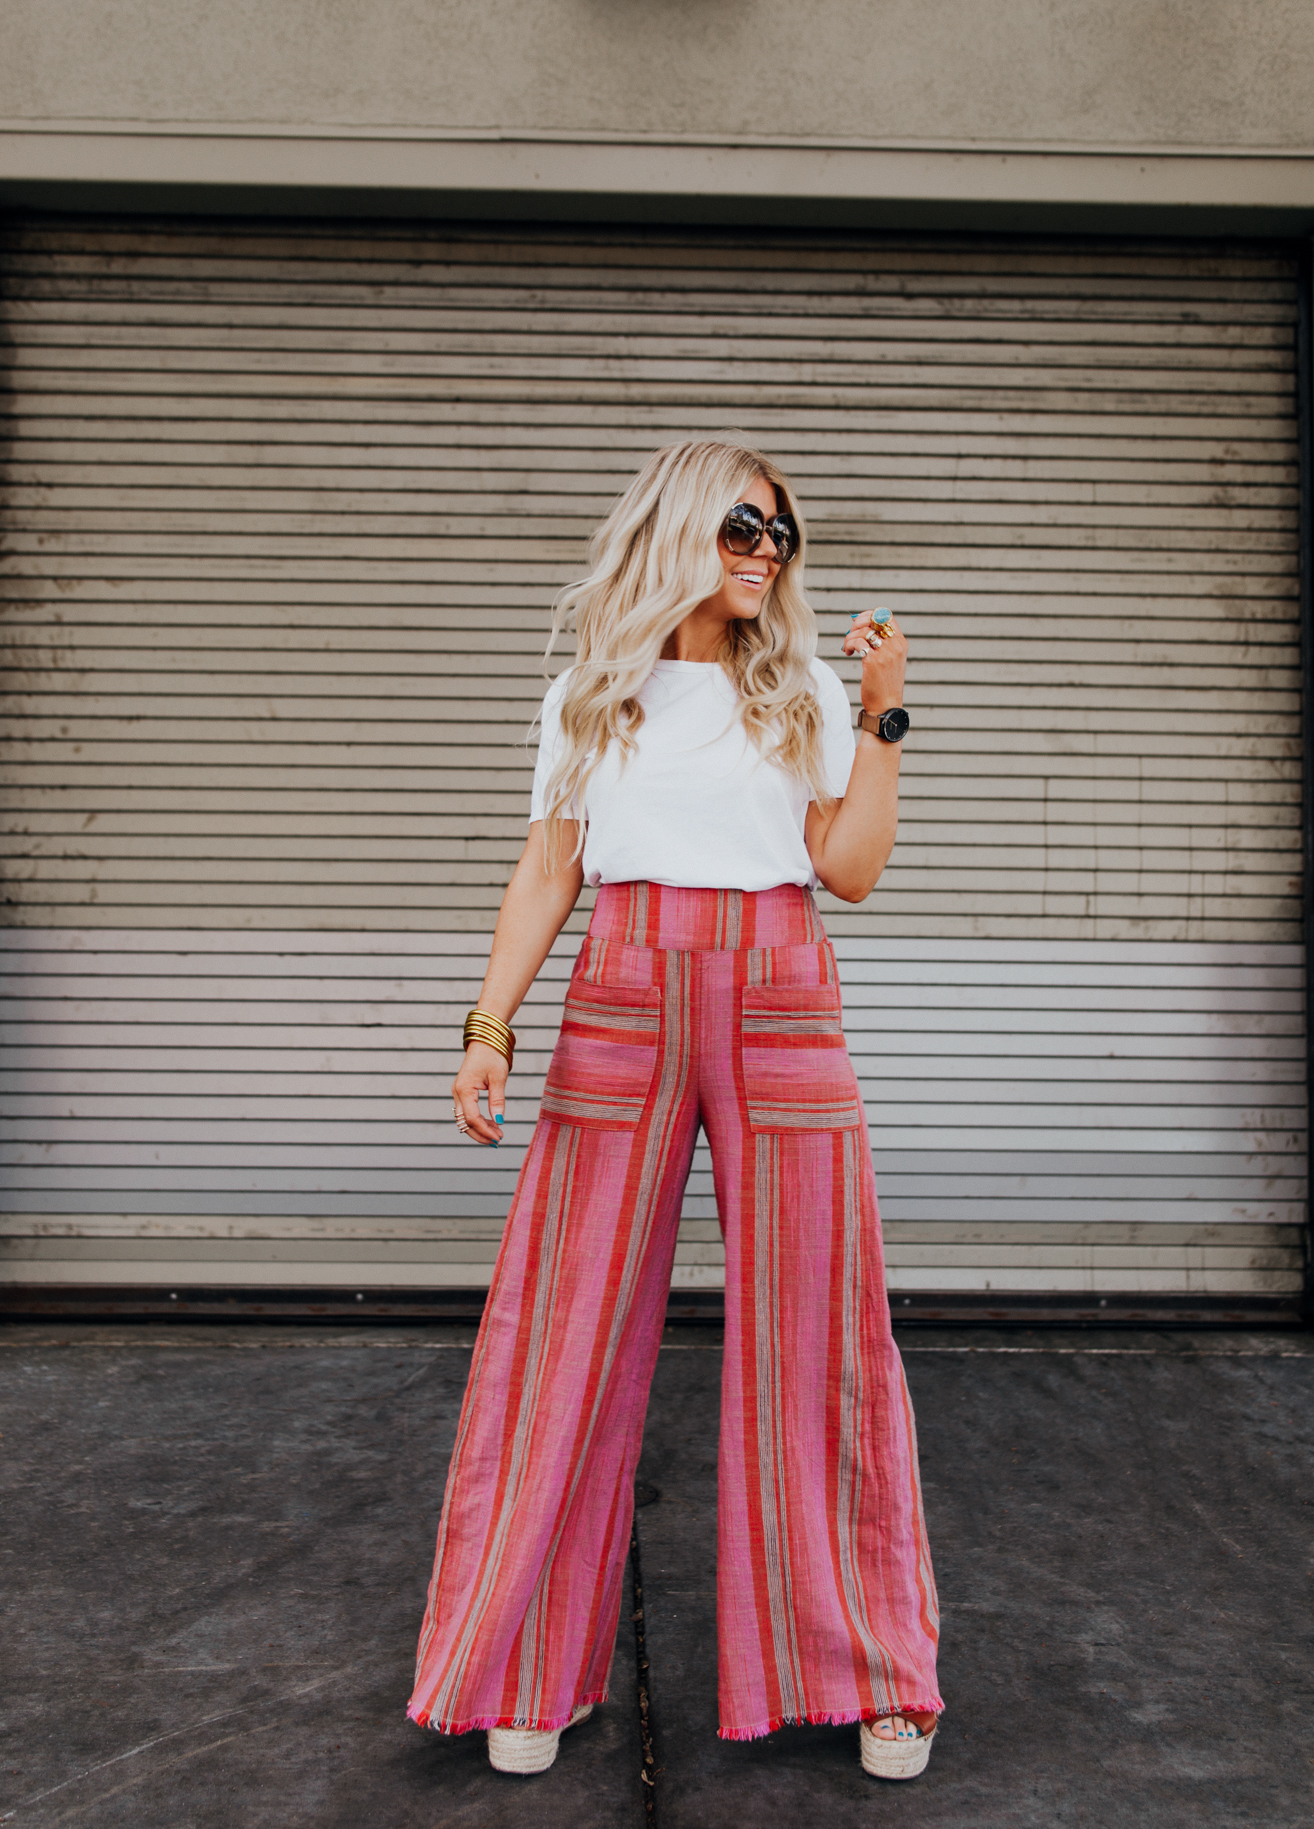 Red Palazzo Pants Outfits.  Outfits, Palazzo pants outfit, Fashion outfits